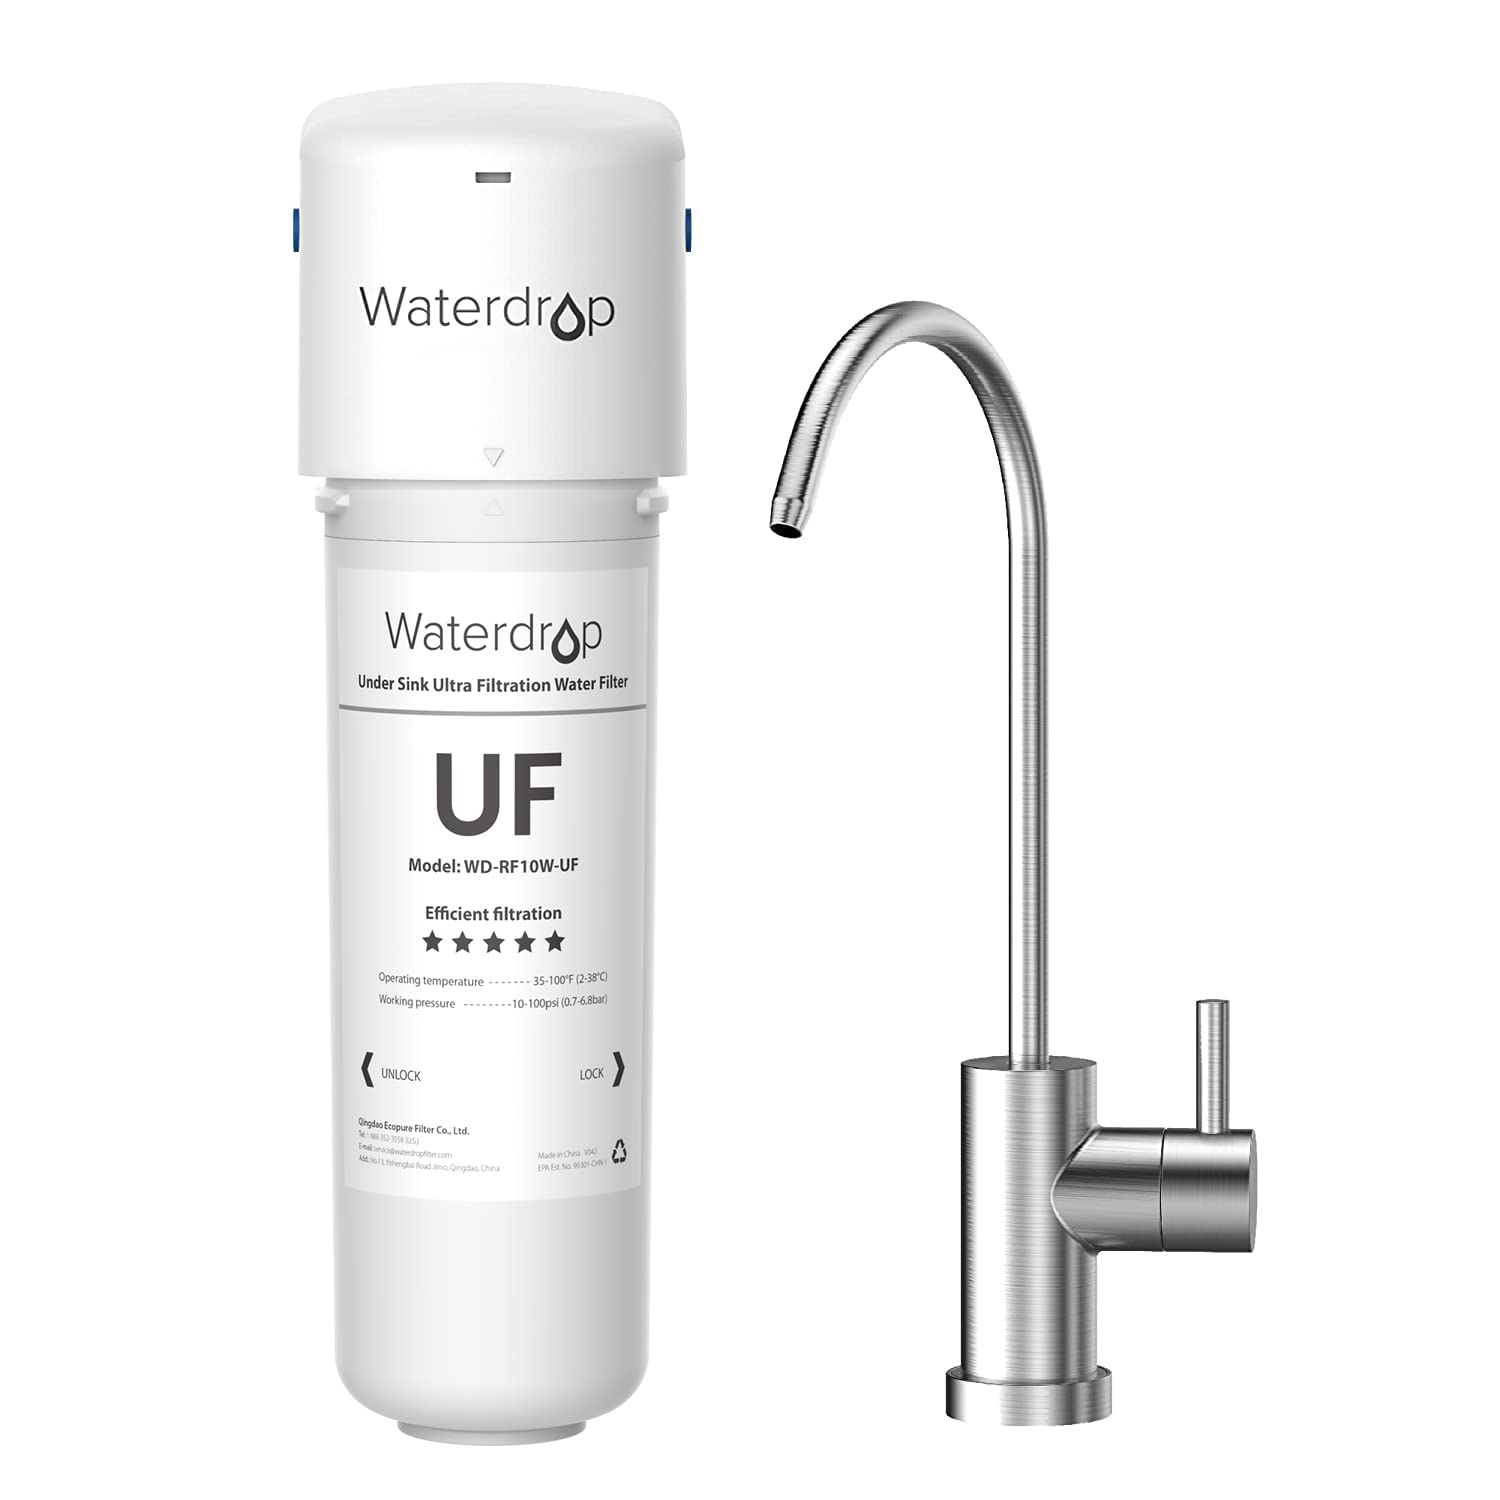 Waterdrop Water Filtration & Water Softeners at